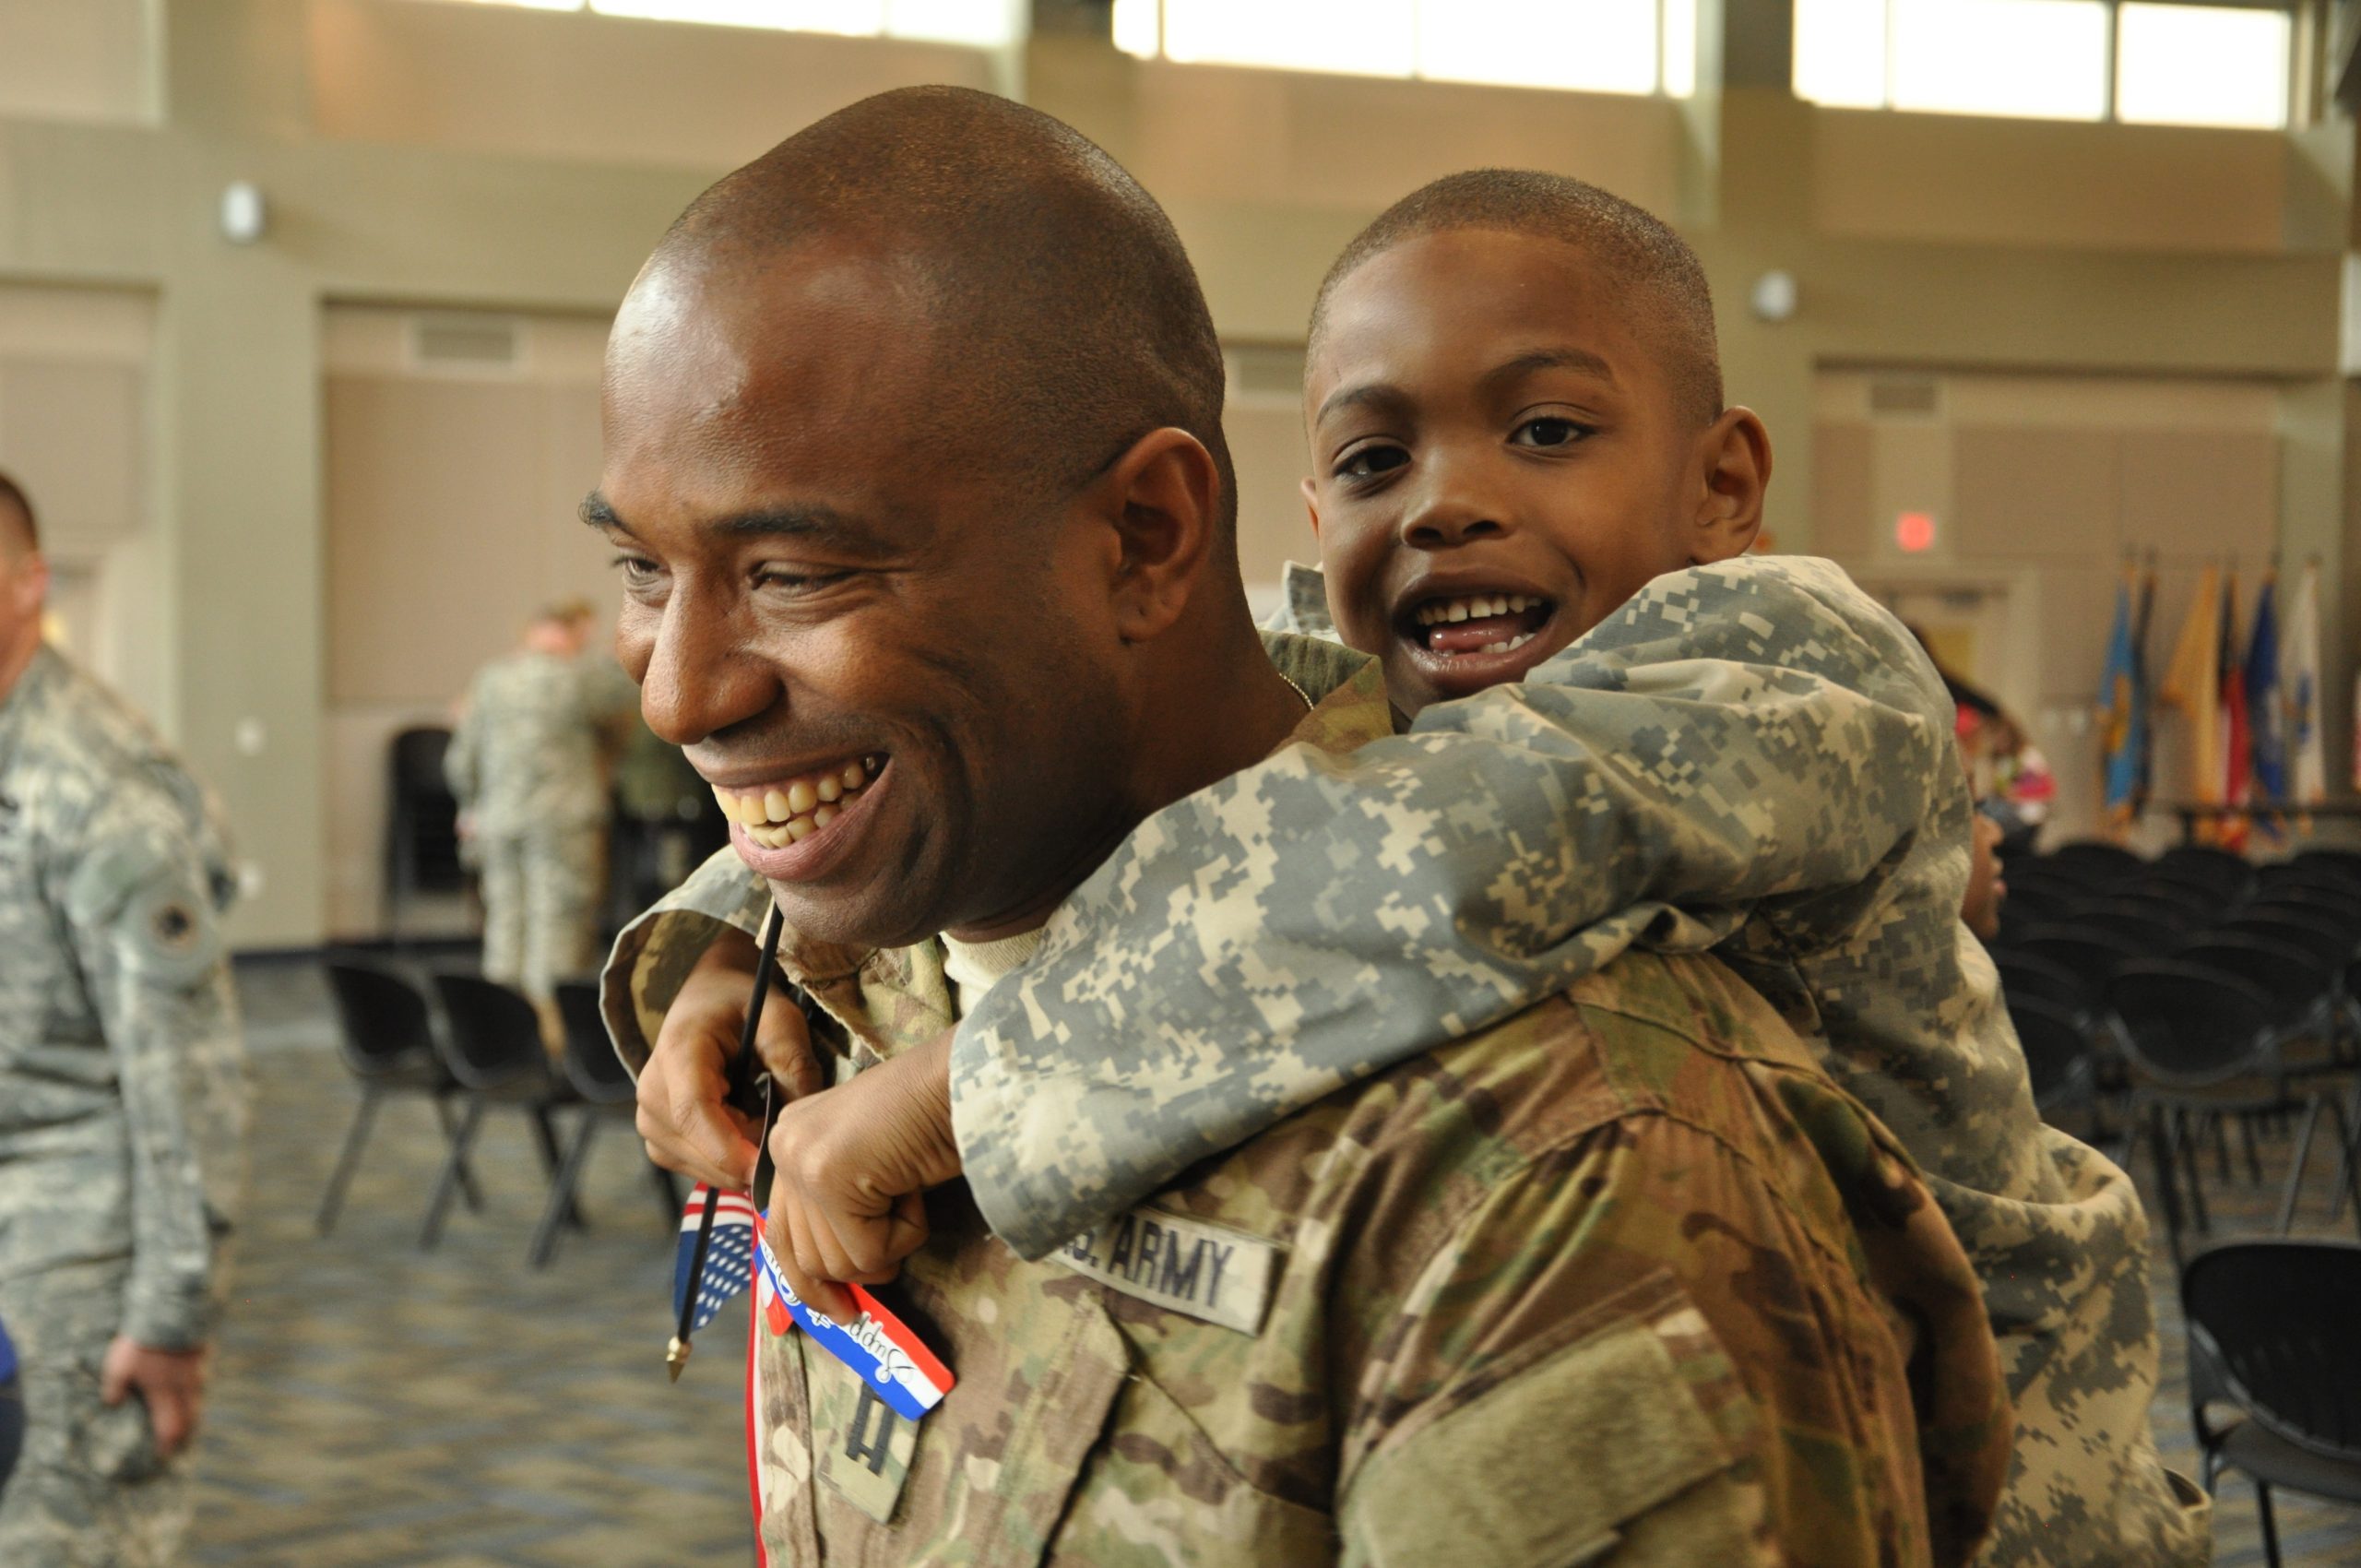 Male service member carrying a young boy piggyback, both smiling